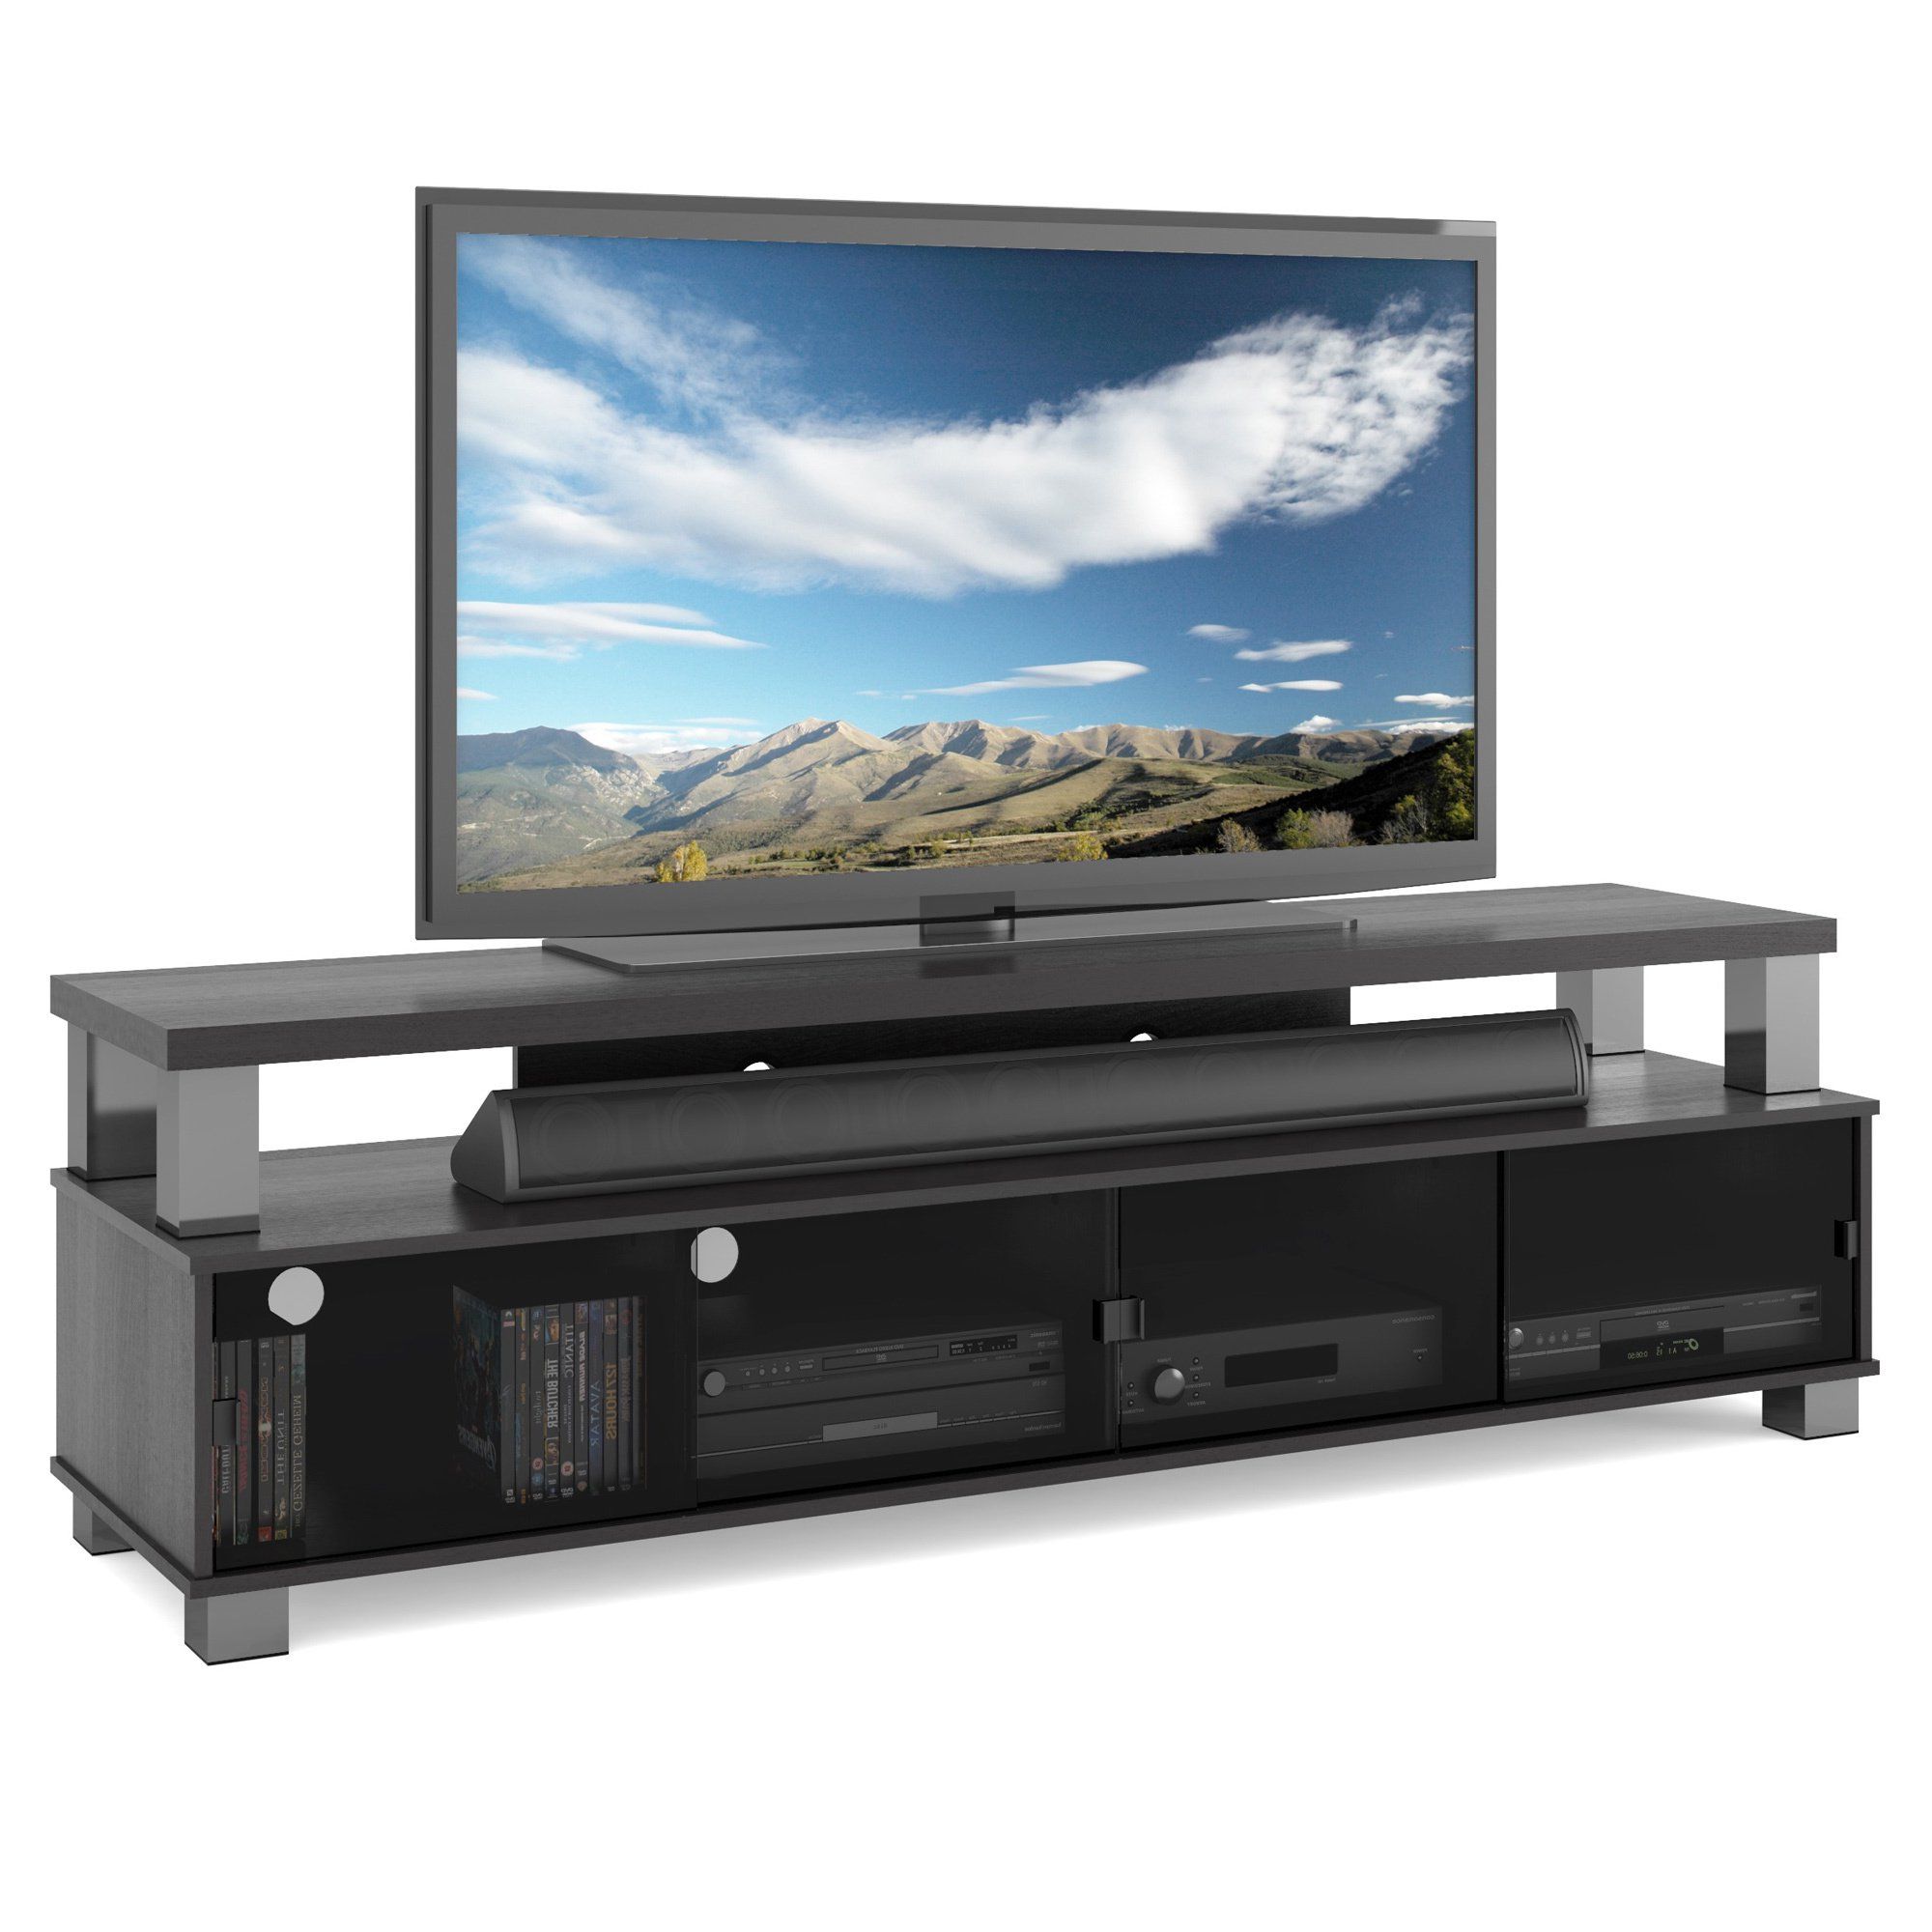 Widely Used Shop Two Tier Tv Bench In Ravenwood Black, For Tvs Up To 80" – Free With Regard To Oxford 84 Inch Tv Stands (View 10 of 20)